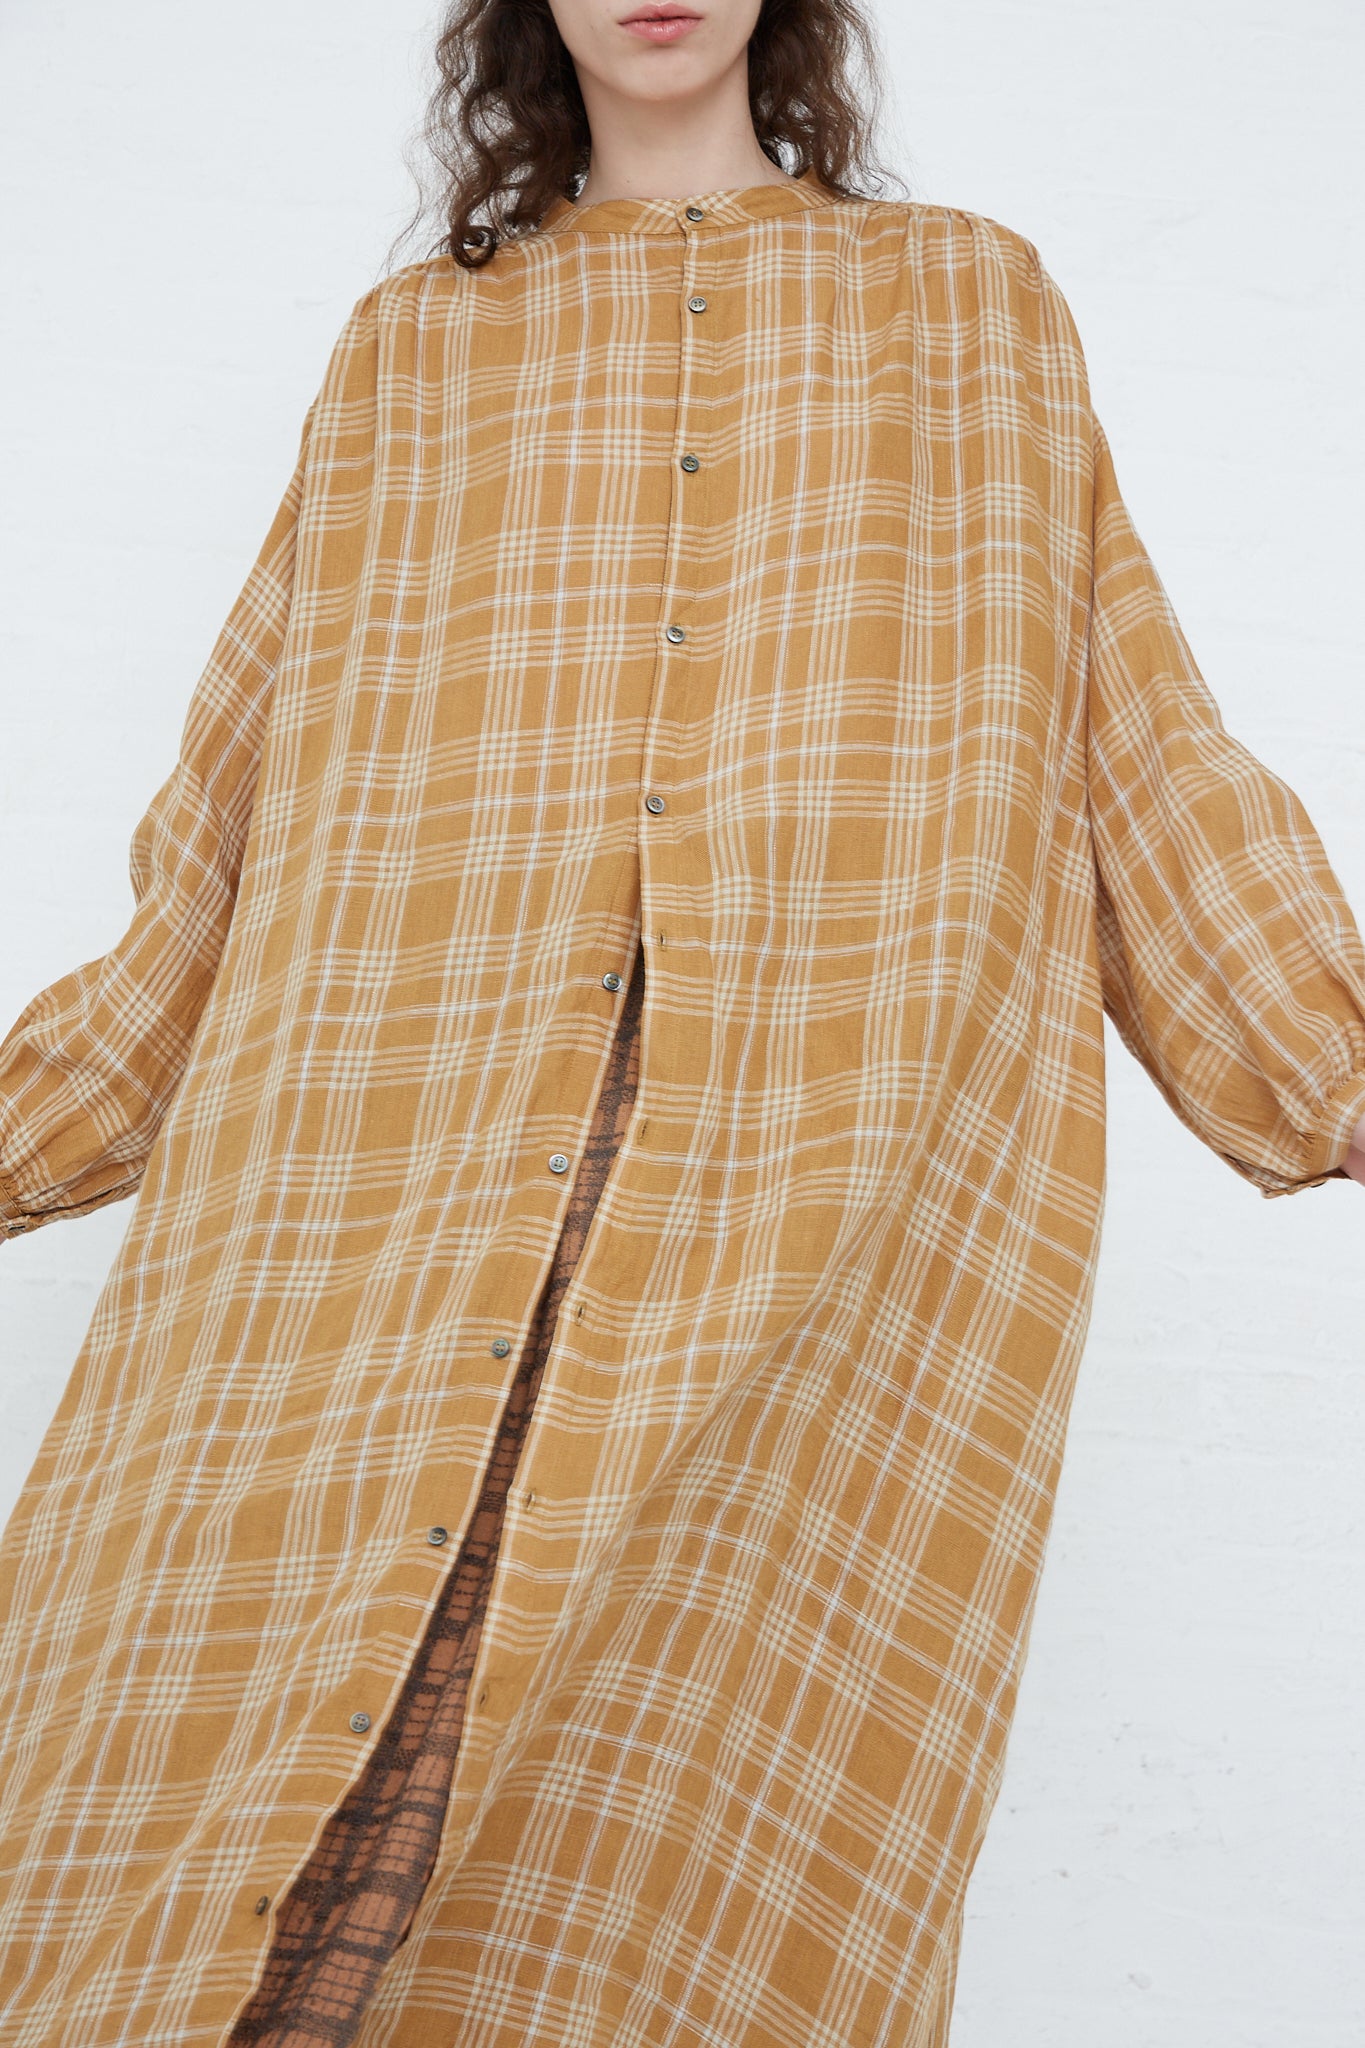 The model is wearing a Linen Check Dress in Camel from Ichi Antiquités.